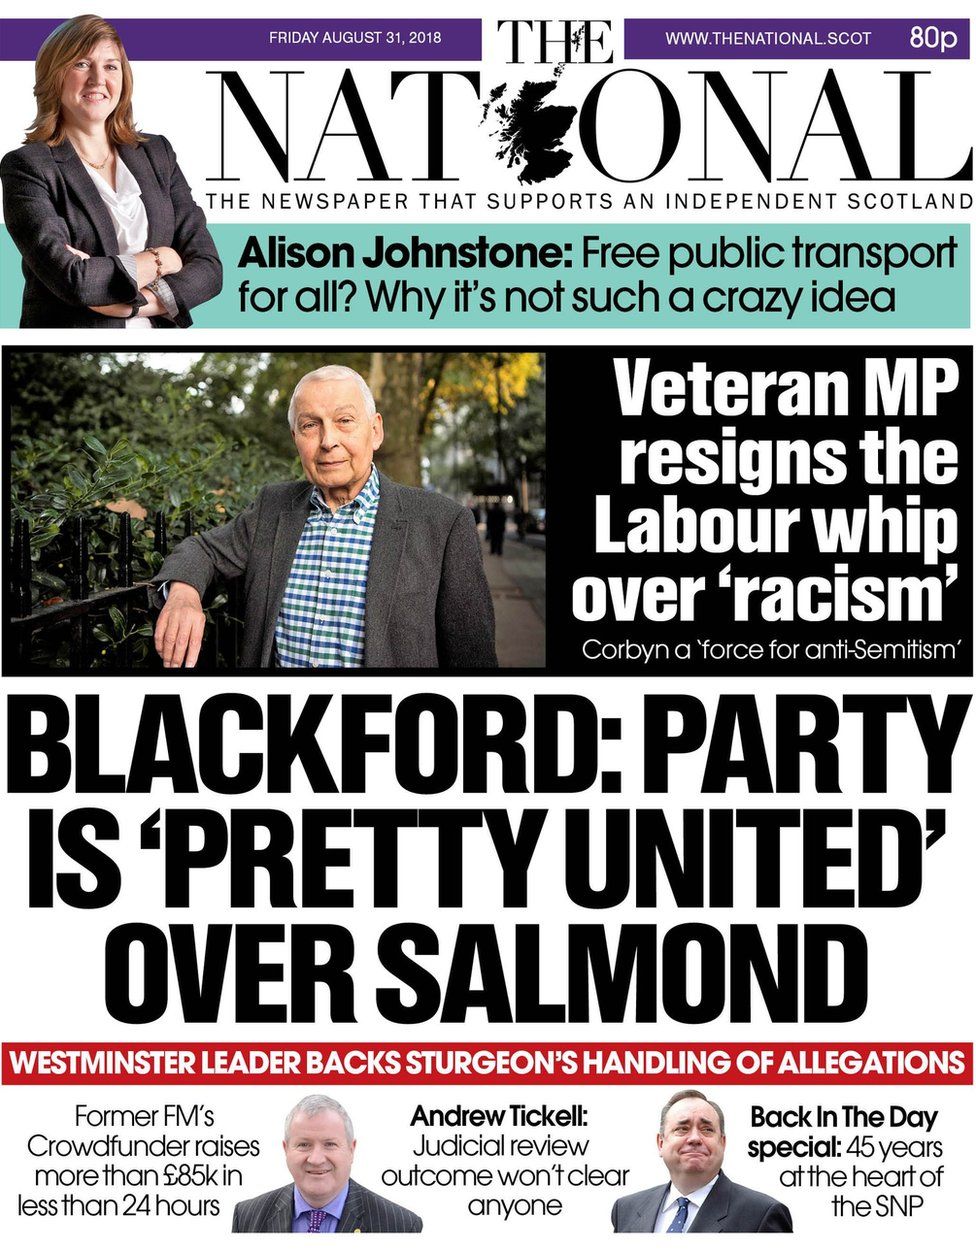 The papers: SNP 'split' over Salmond claims - BBC News